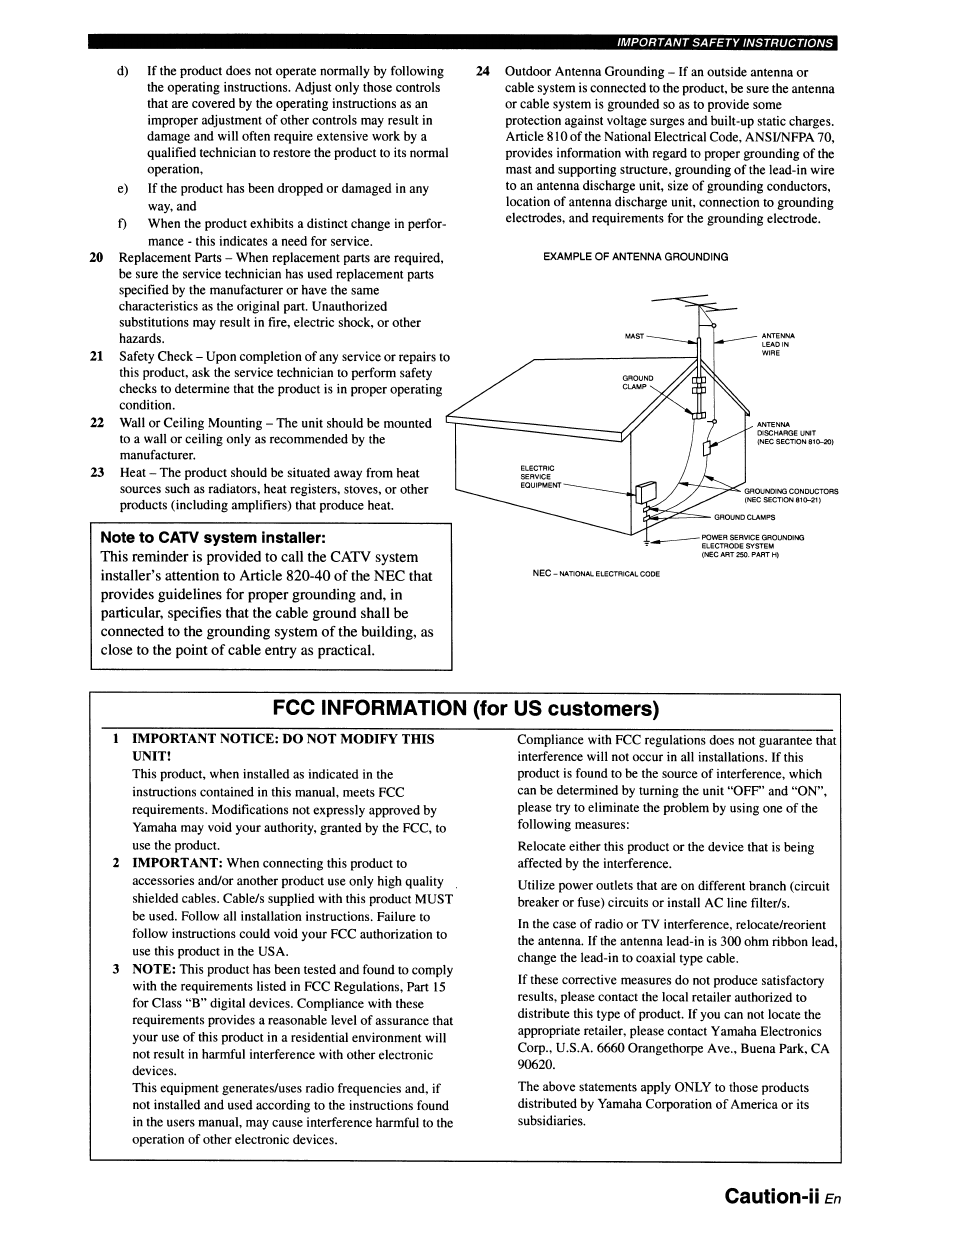 Note to catv system installer | Yamaha RX-V663 User Manual | Page 3 / 151